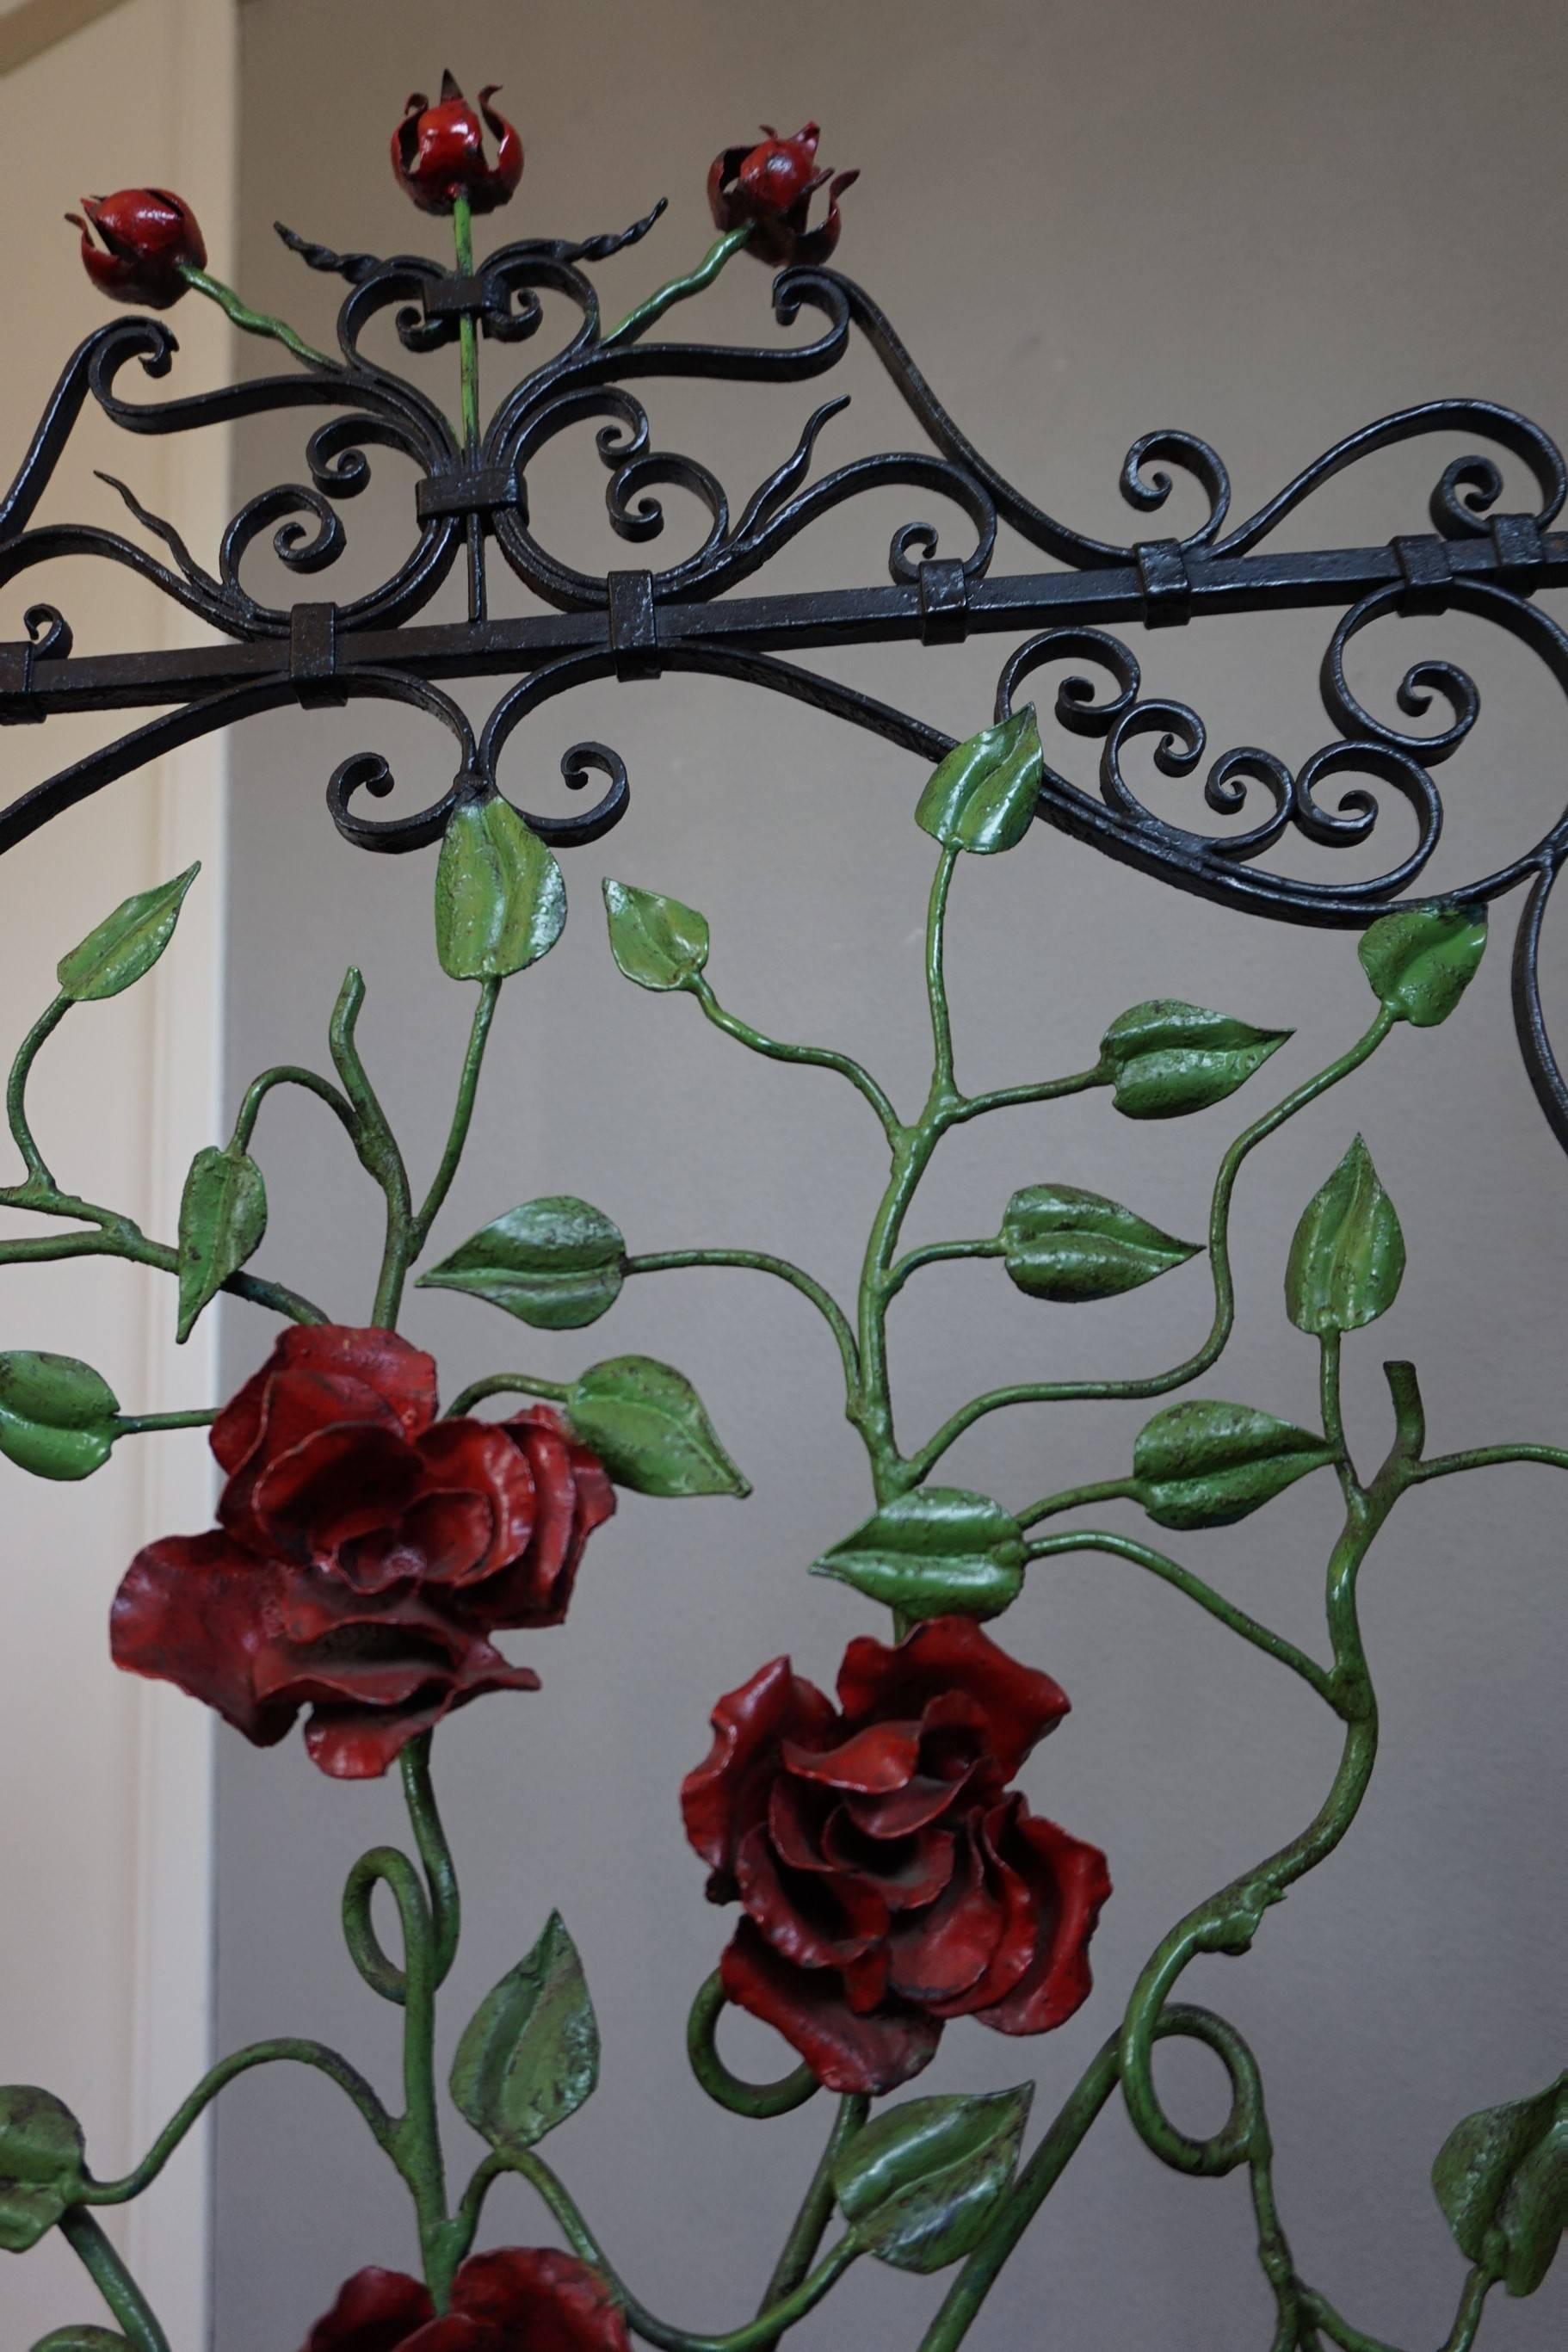 Hand-Crafted Early 20th Century Handcrafted Wrought Iron Firescreen with Roses in Vase Decor